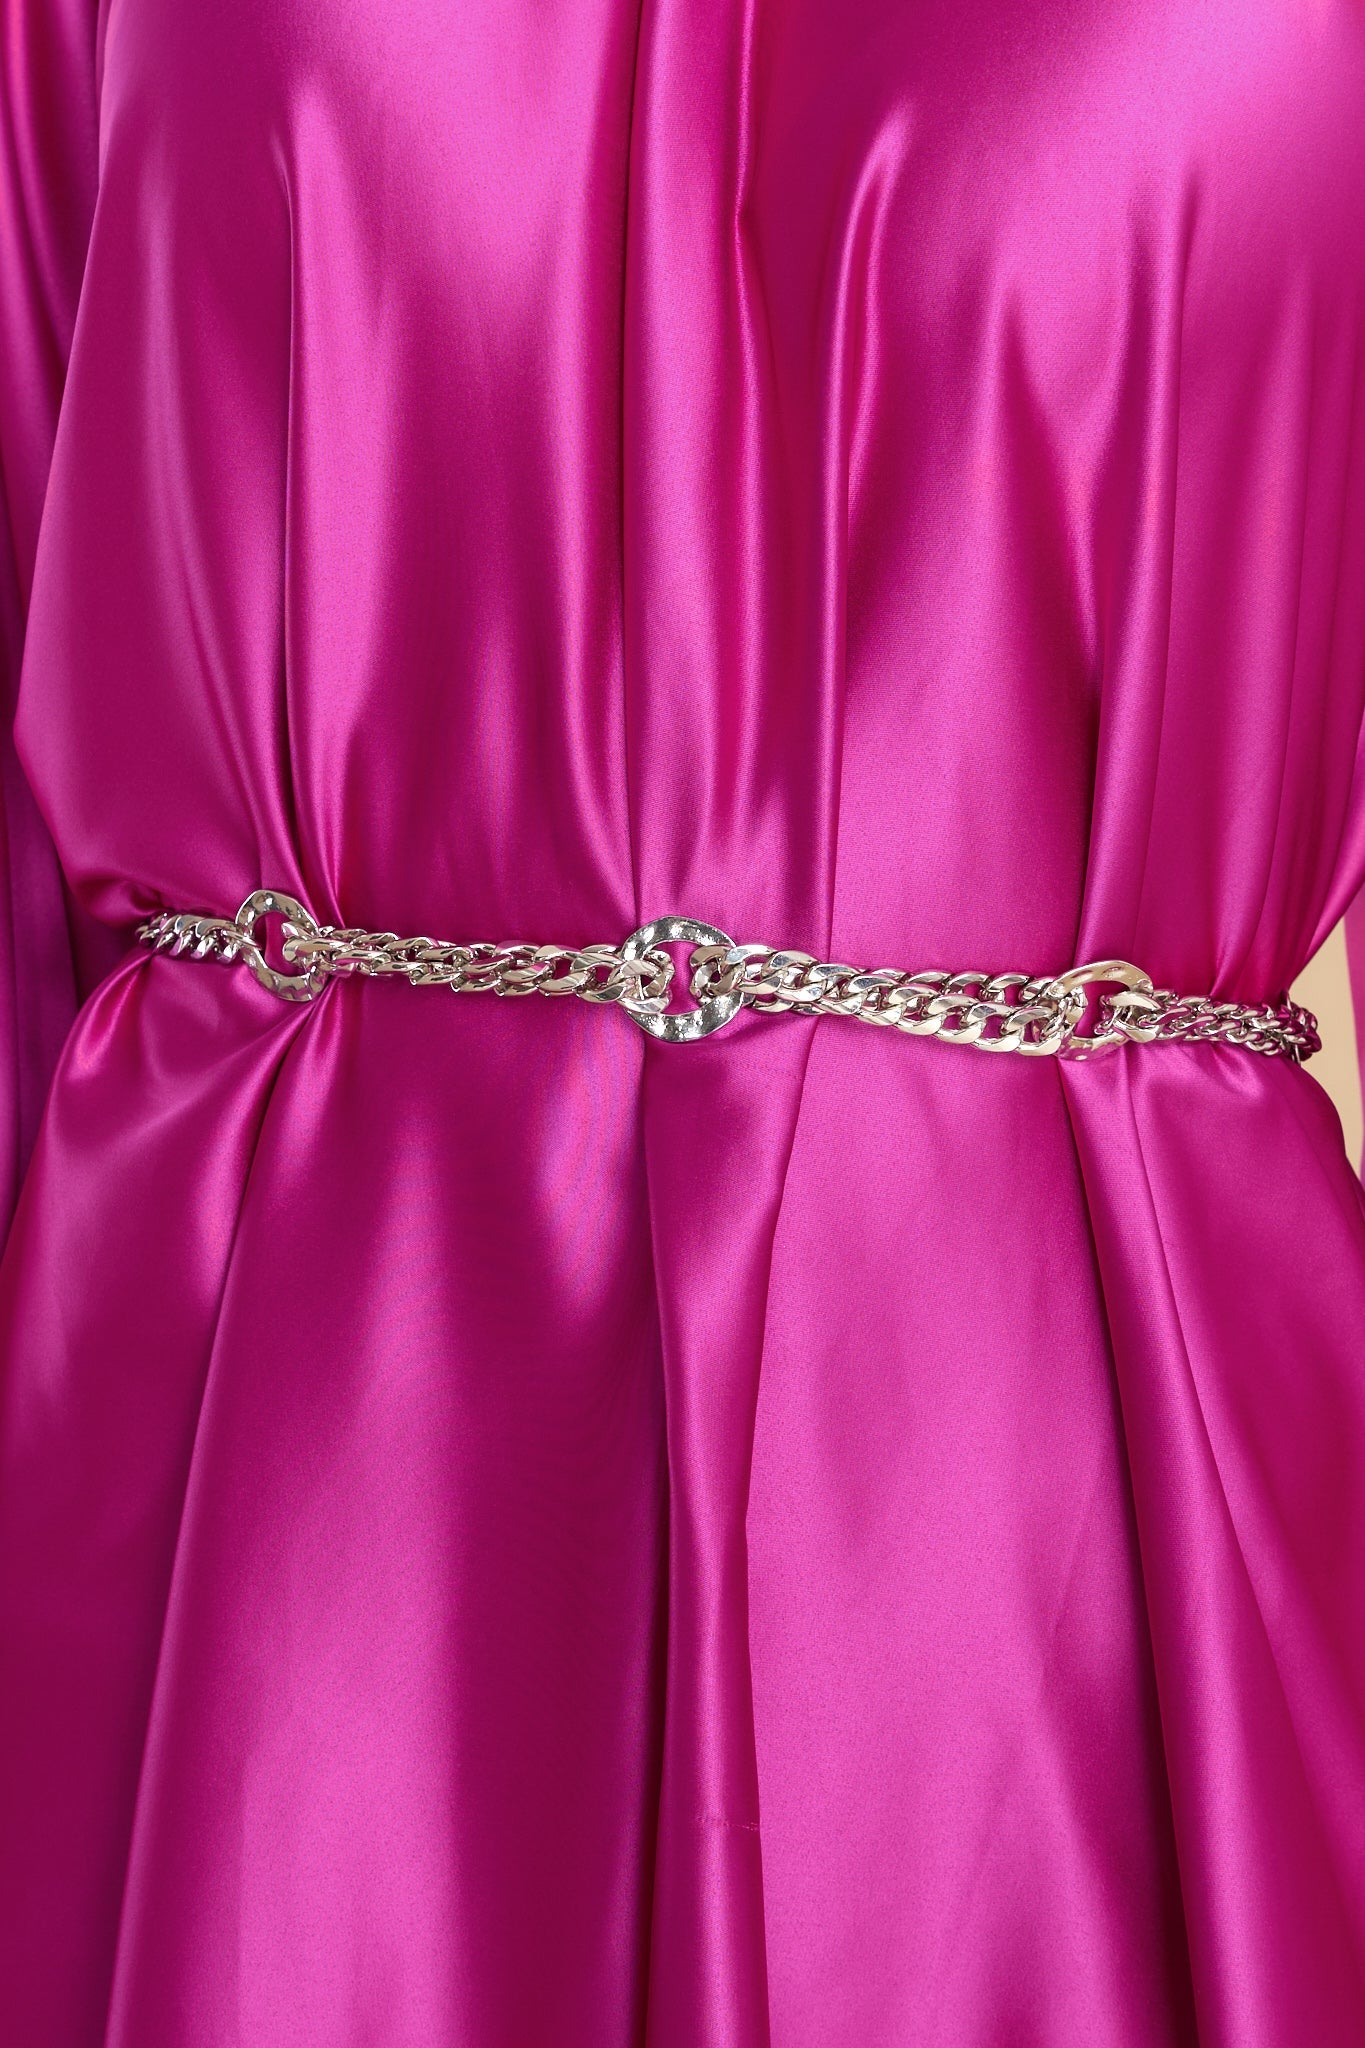 Love Your Curves Silver Chain Belt - Red Dress